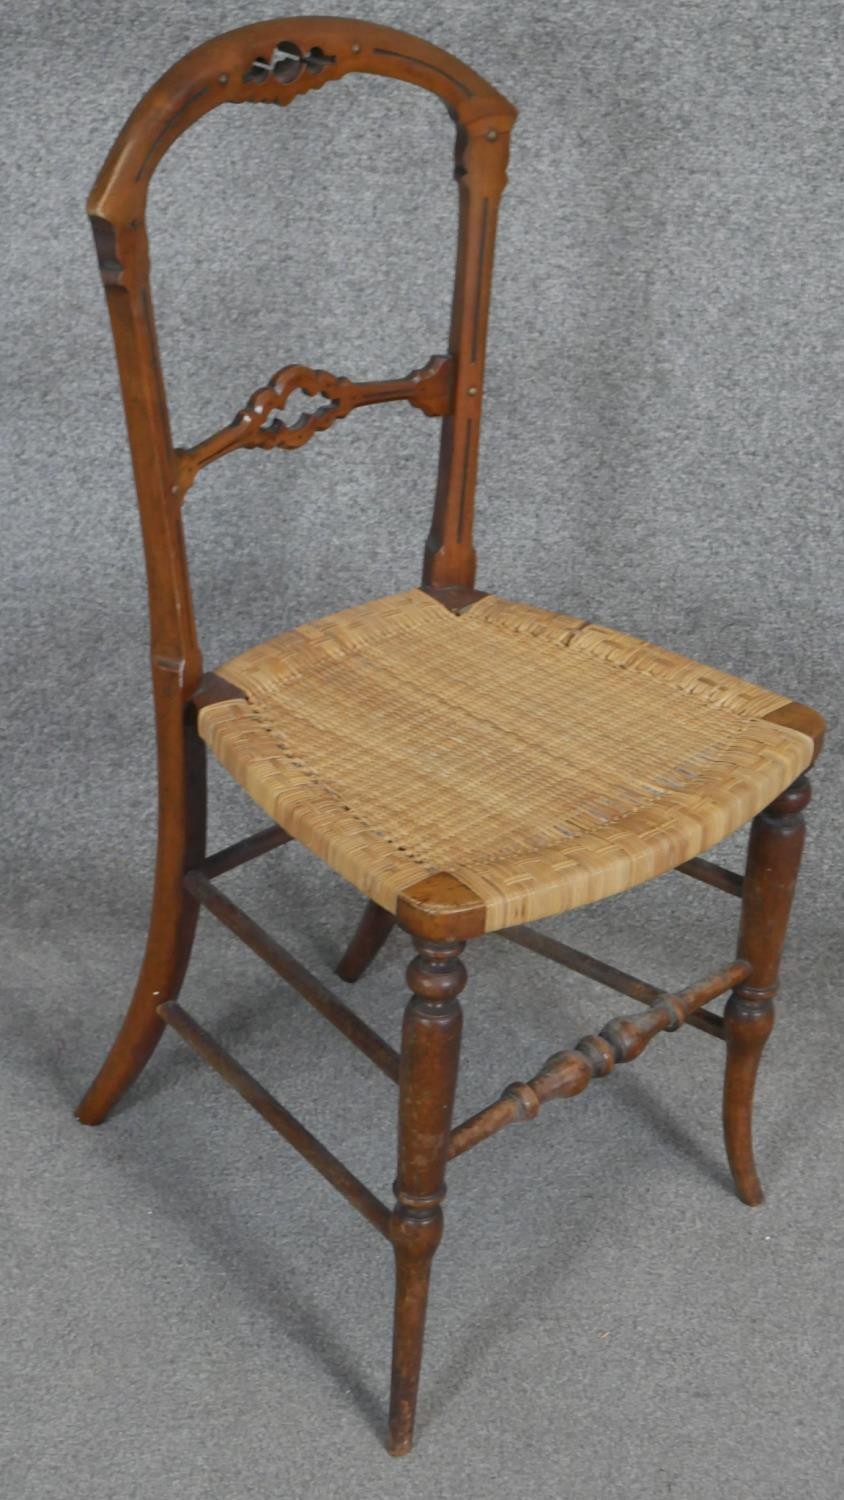 A 19th century walnut bedroom chair with woven seat and a similar caned seat beech chair. - Image 3 of 3